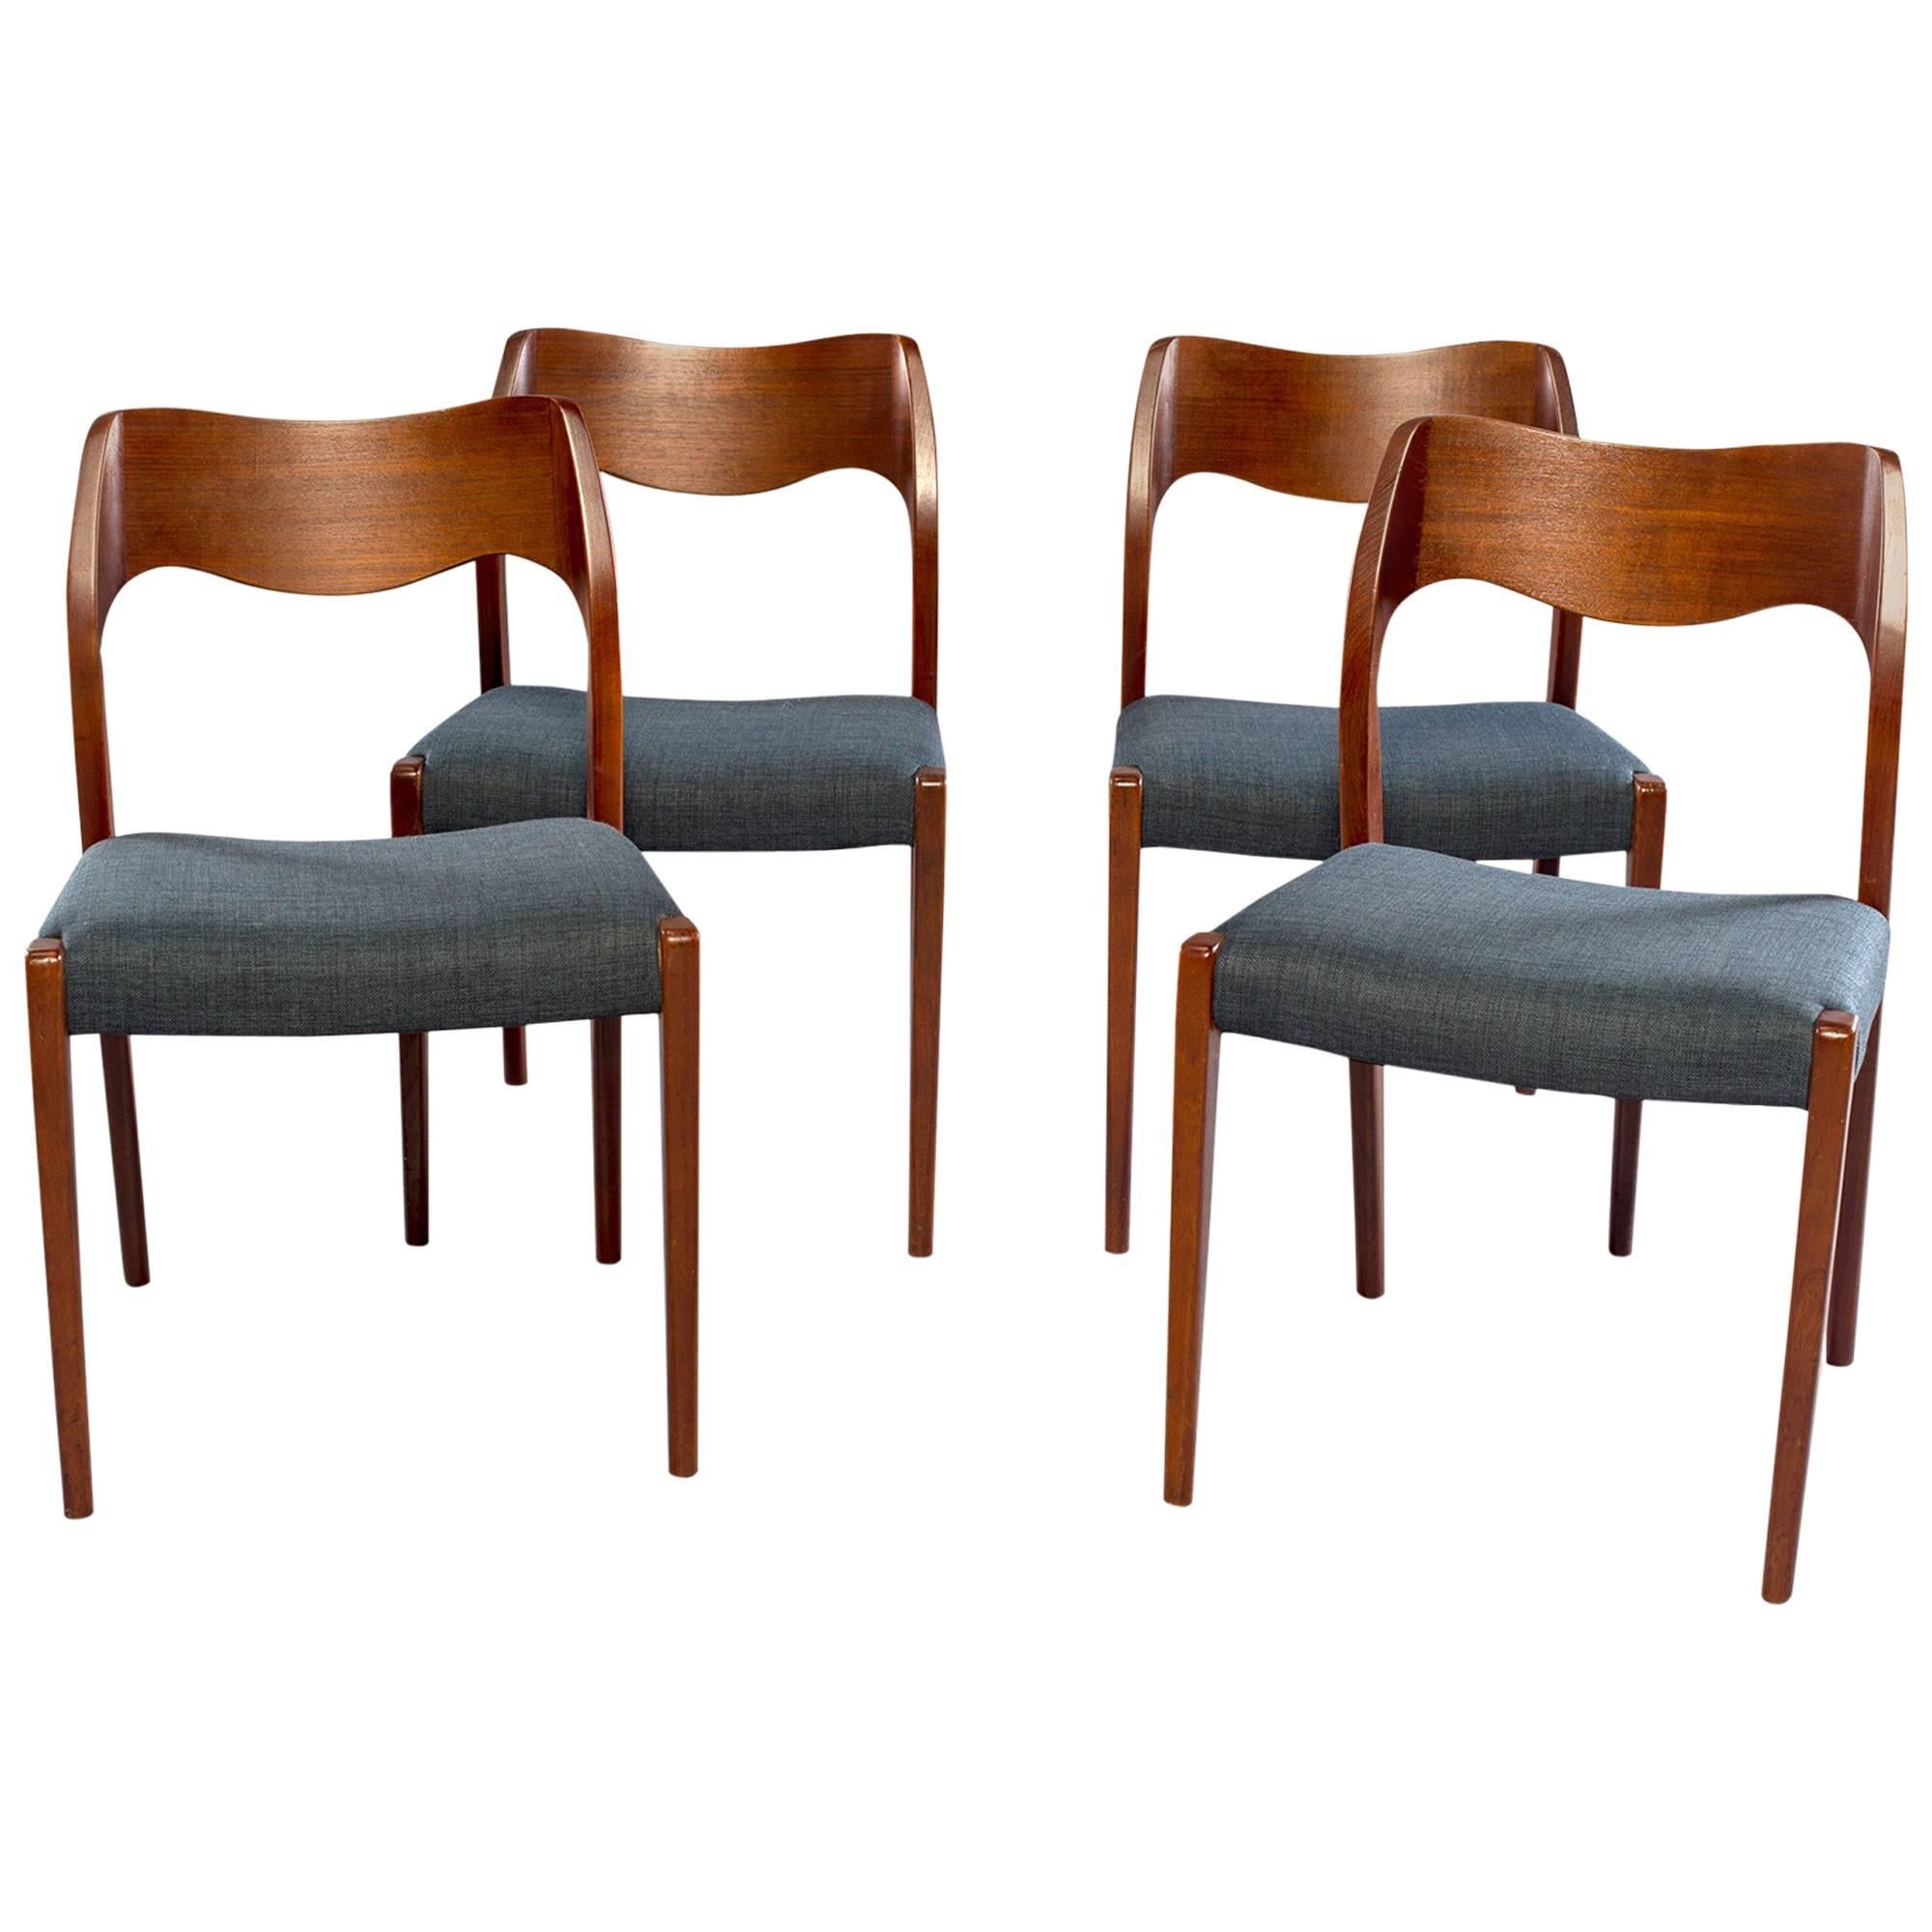 Set of Four Danish Midcentury Teak Chairs with New Upholstery